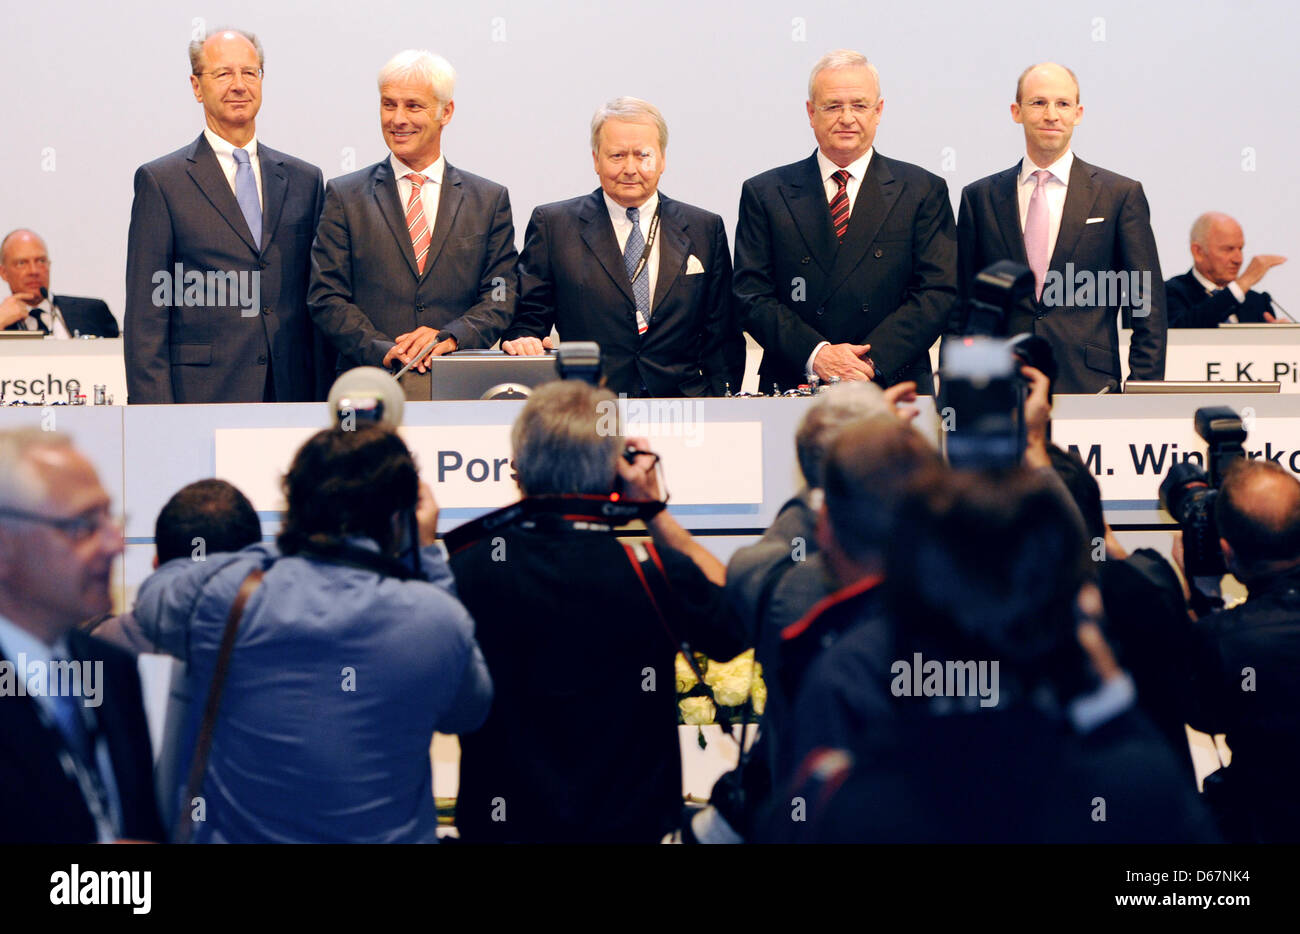 CFO of Porsche SE, Hans Dieter Poetsch (L-R), CEO of Porsche AG, Matthias Mueller, chairman of the supervisory board, Wolfgang Porsche, and CEO of Volkswagen AG, Martin Winterkorn and board member of Porsche SE, Philipp von Hagen, stand on a stage at the general meeting of Porsche SE in Stuttgart, Germany, 25 June 2012. Porsche SE owns most of Volkswagen's common shares, as well as Stock Photo